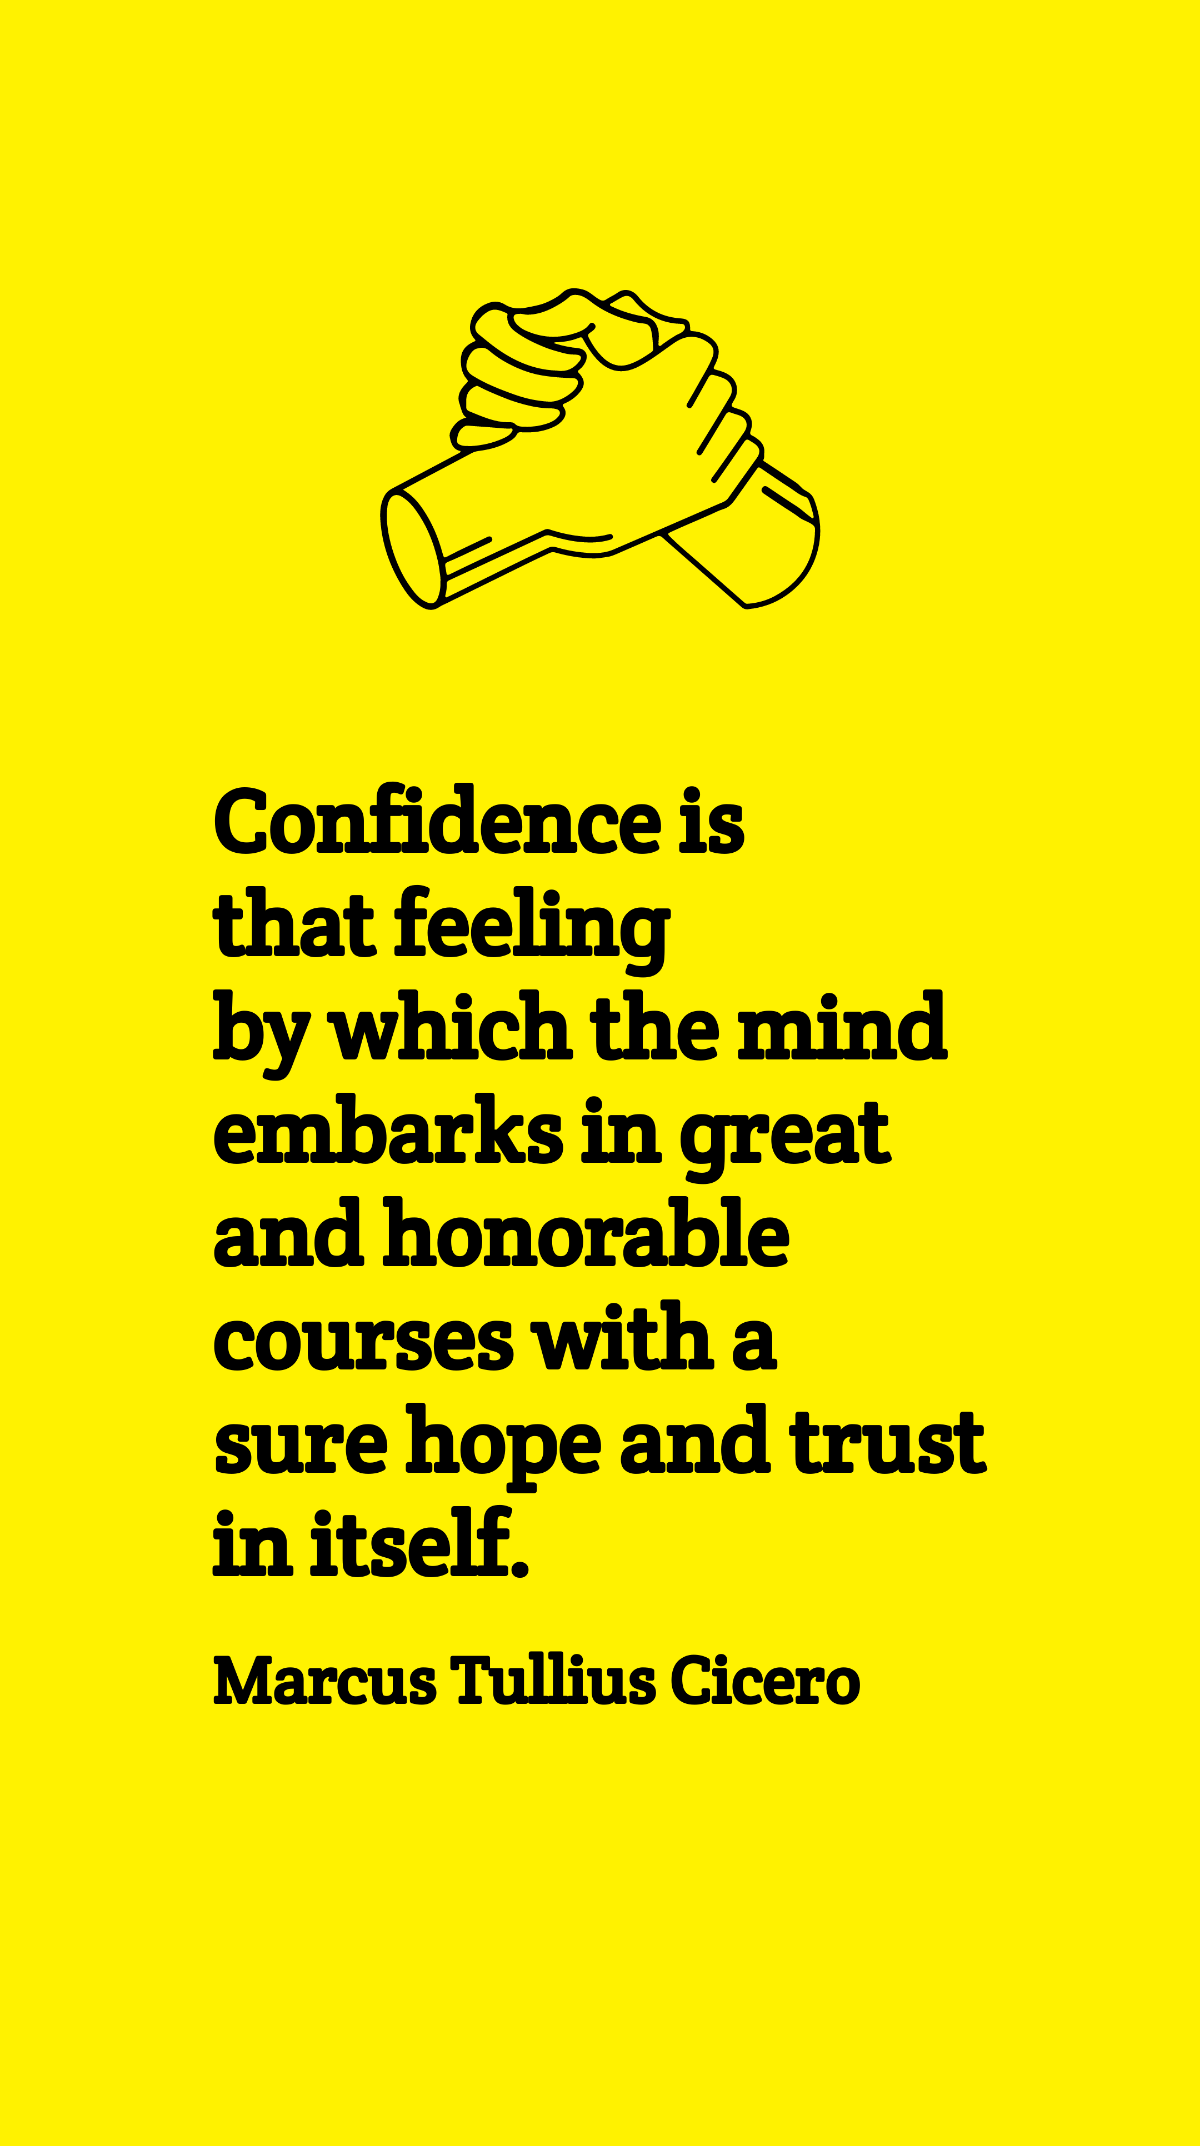 Free Marcus Tullius Cicero - Confidence is that feeling by which the mind embarks in great and honorable courses with a sure hope and trust in itself. Template